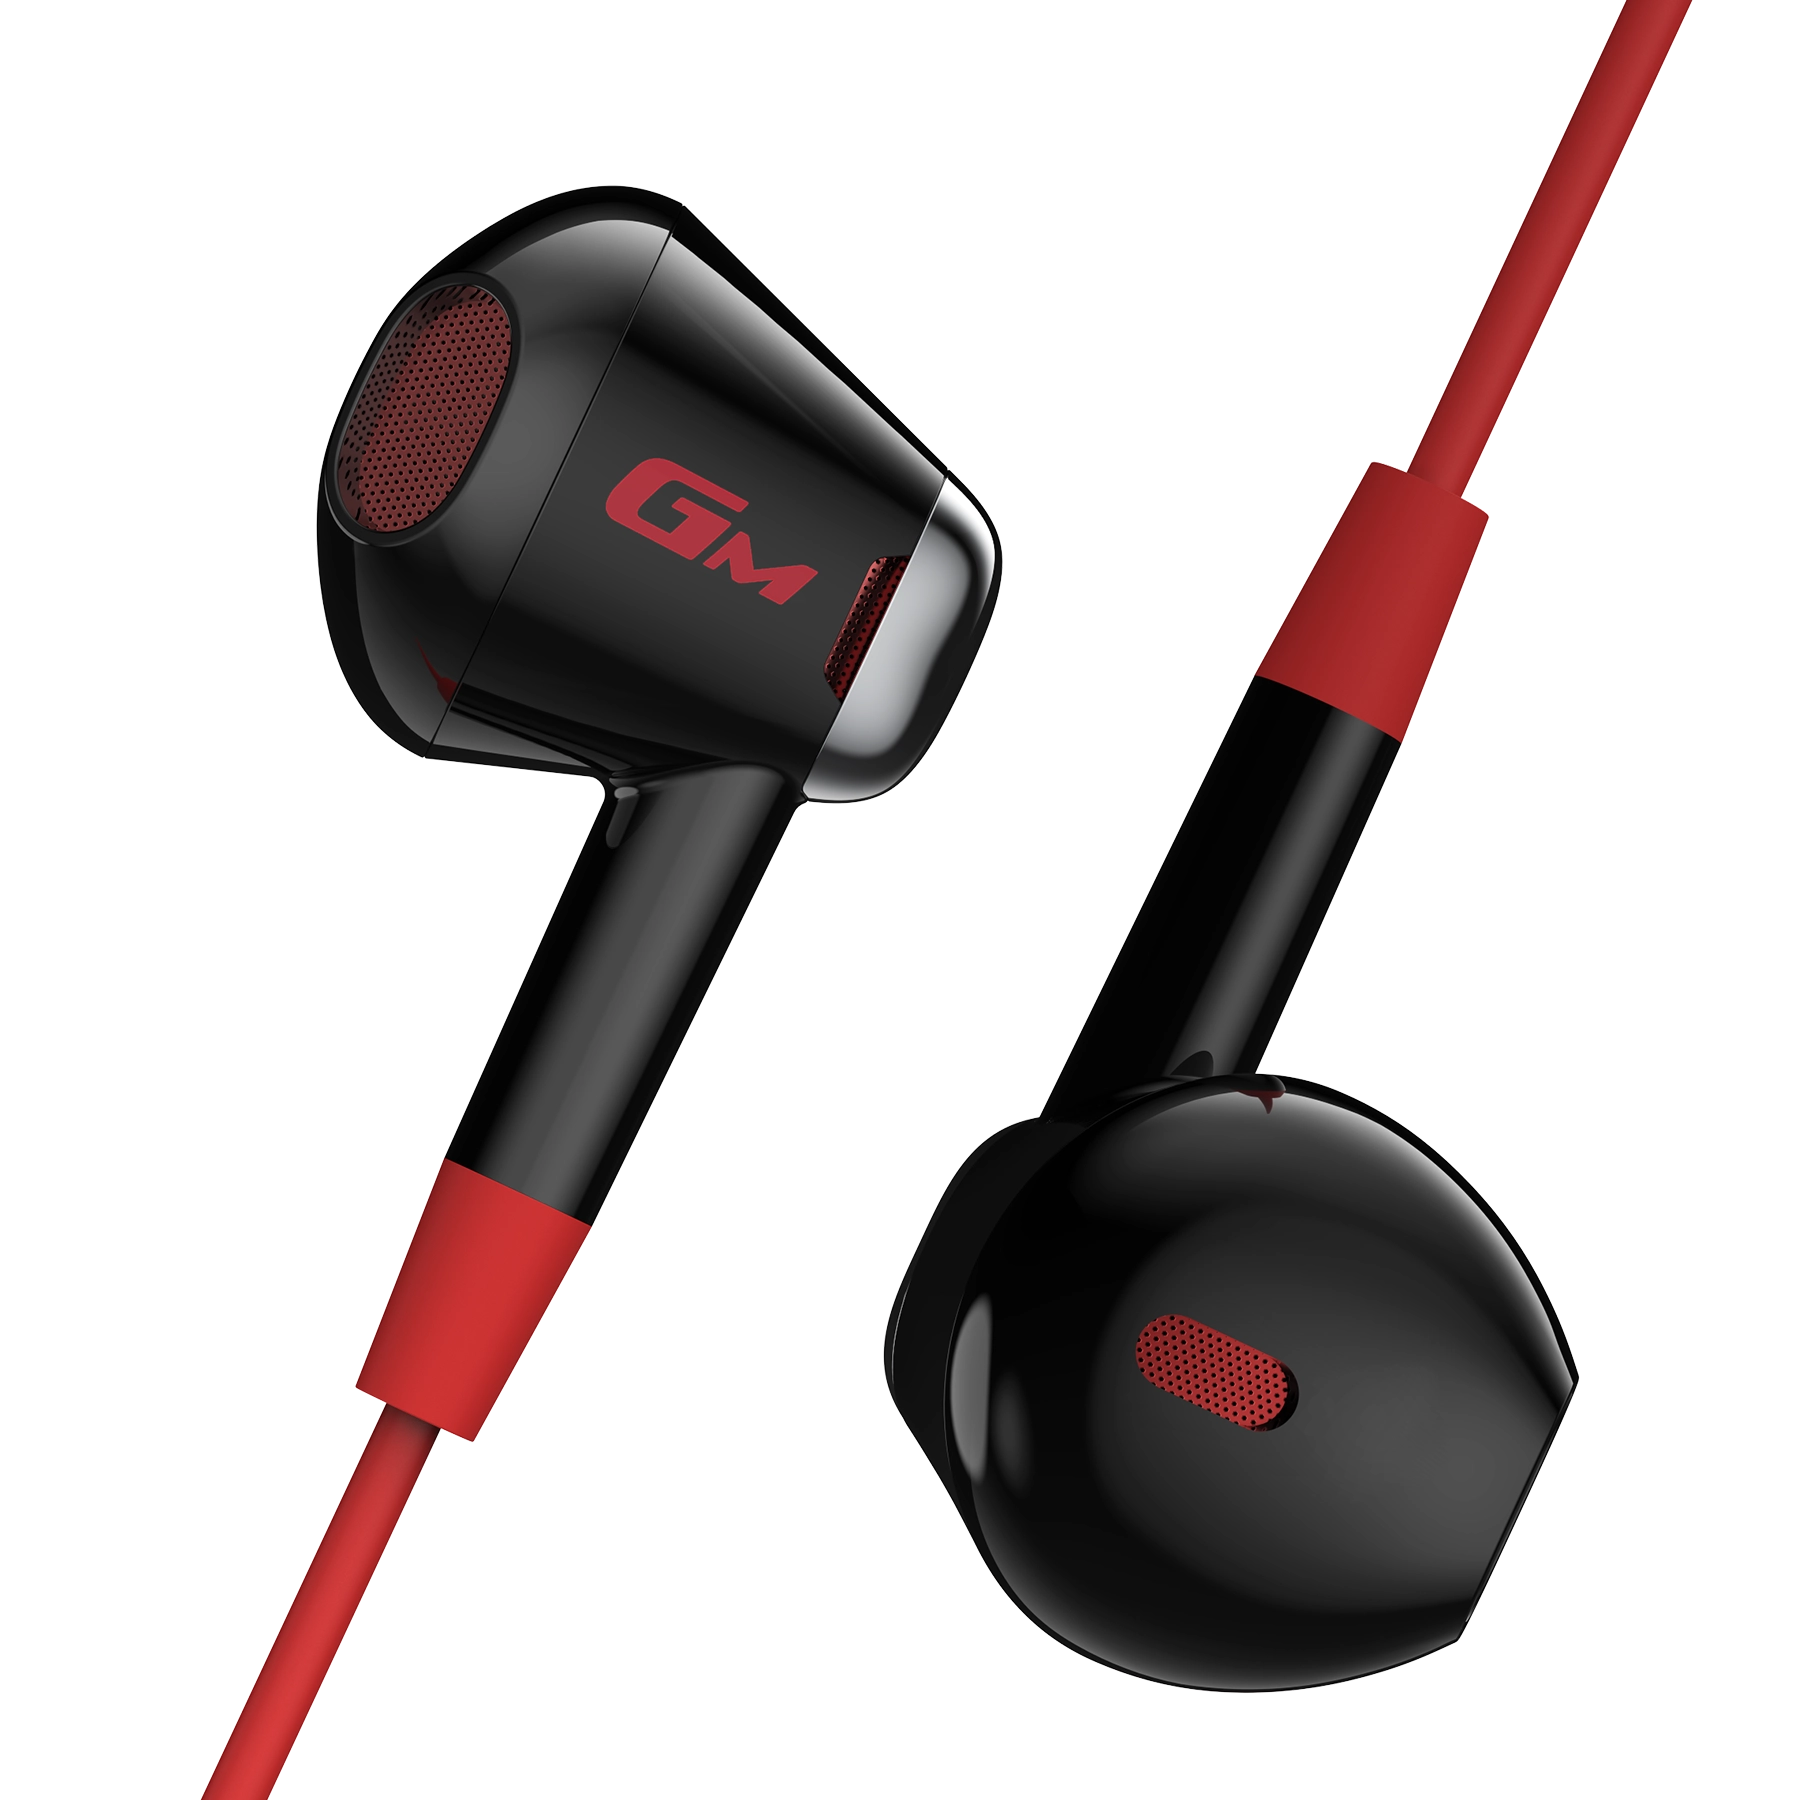 GM180 PLUS Earbuds Product Pictures red_2